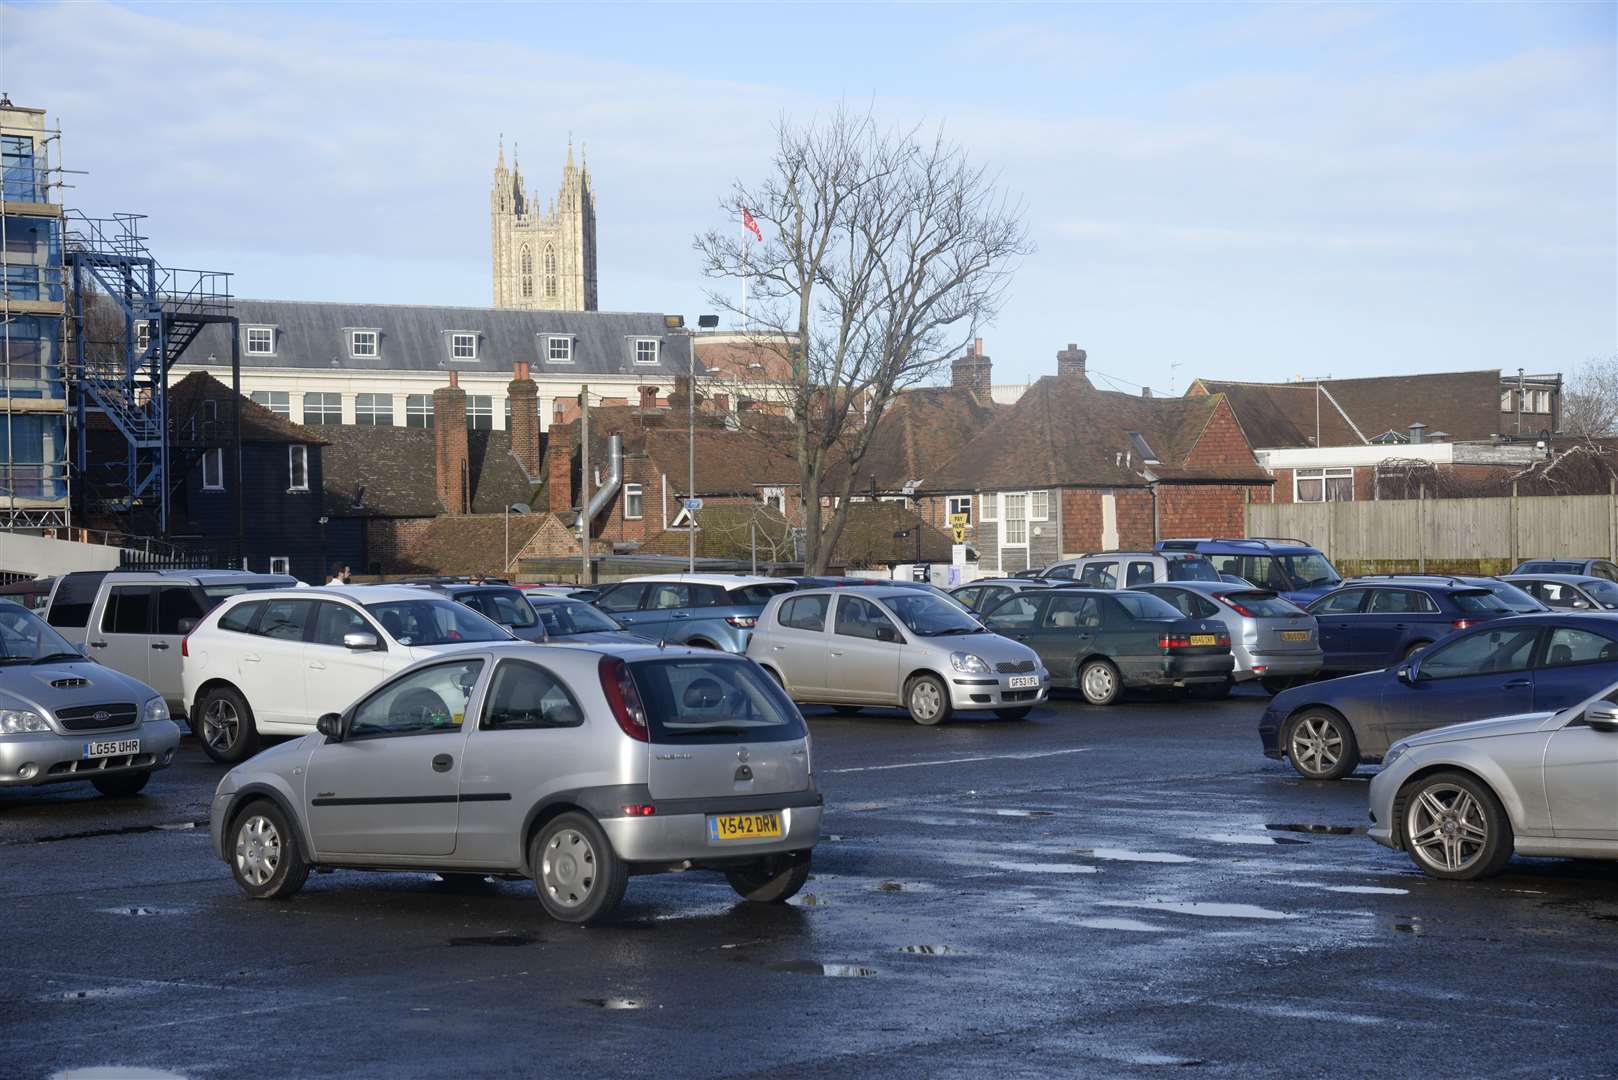 Holman's Meadow car park will have a decrease in rates